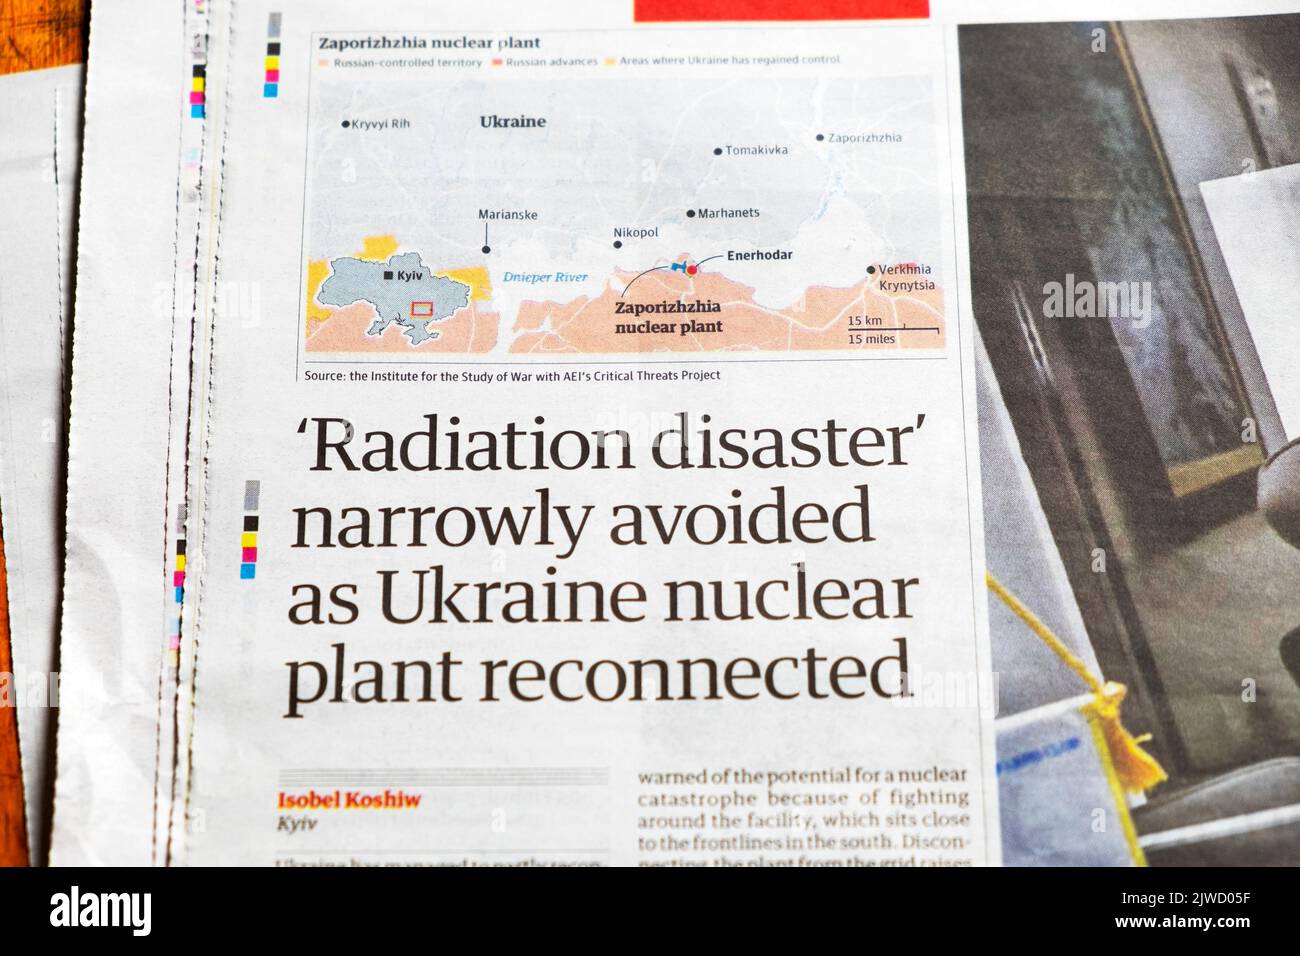 'Radiation disaster' narrowly avoided as Ukraine nuclear plant reconnected' Guardian newspaper headline energy article 27 August 2022 London UK Stock Photo